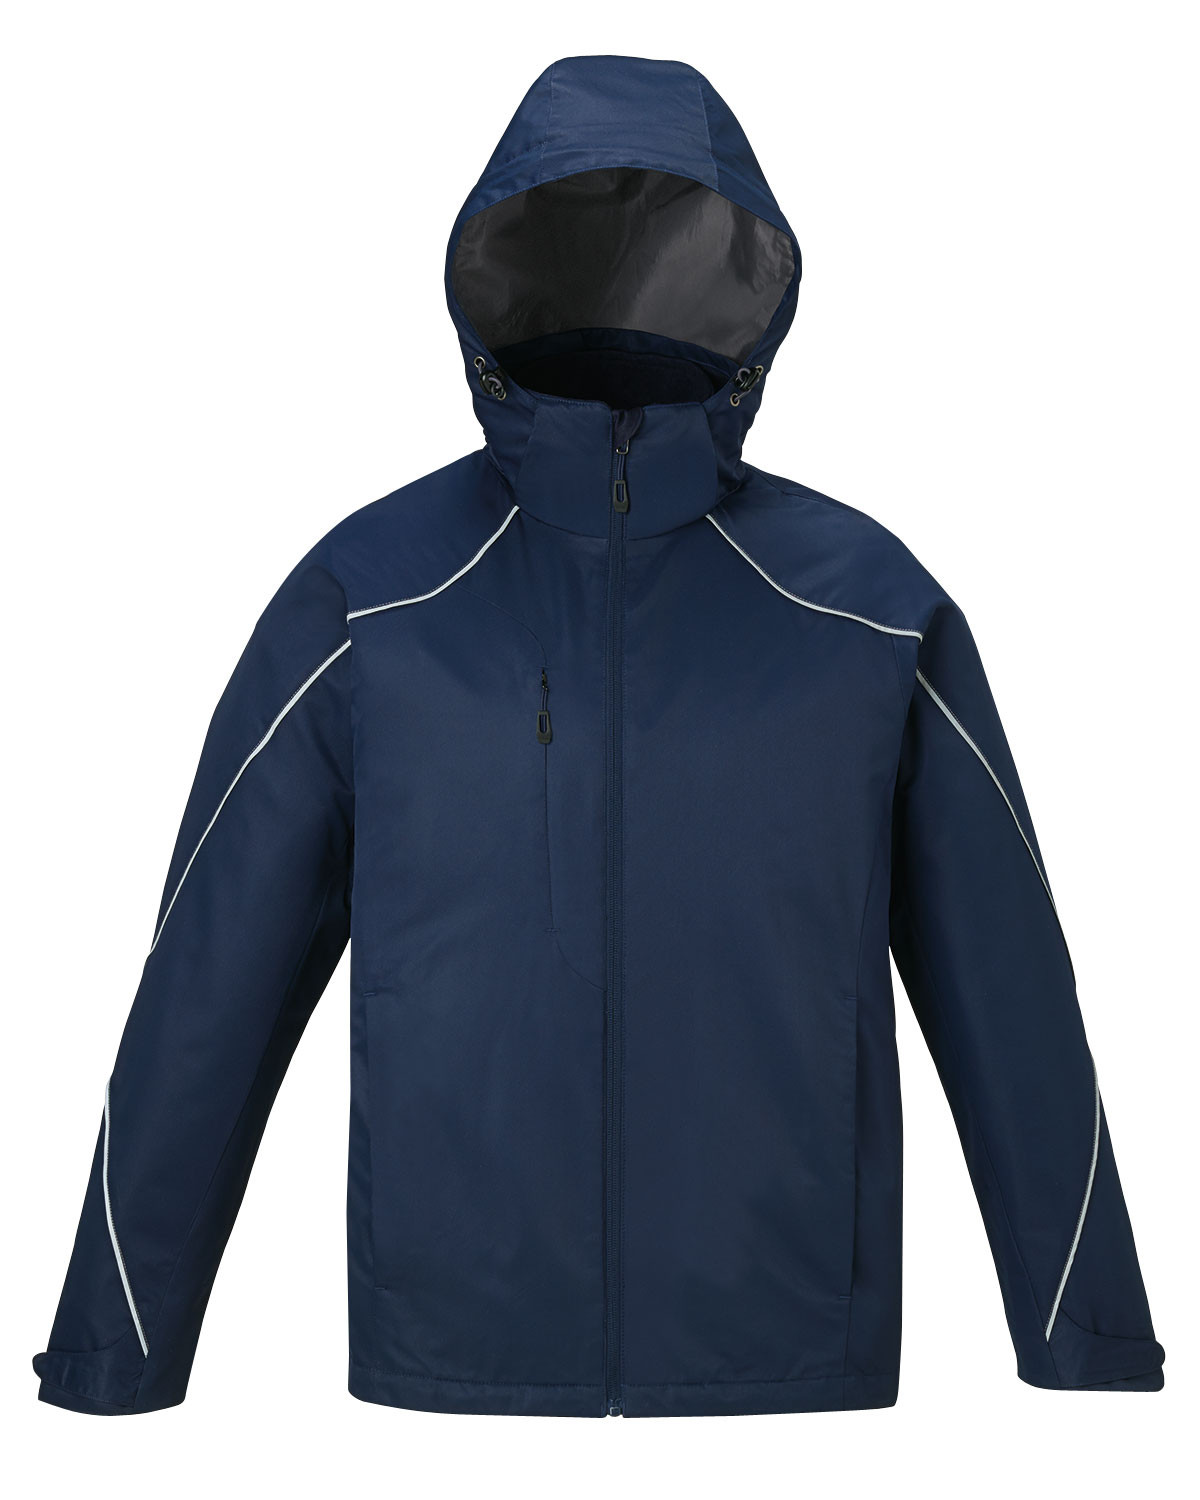 North End 88196 - Men's Angle 3-In-1 Jacket With With Bonded Fleece Liner